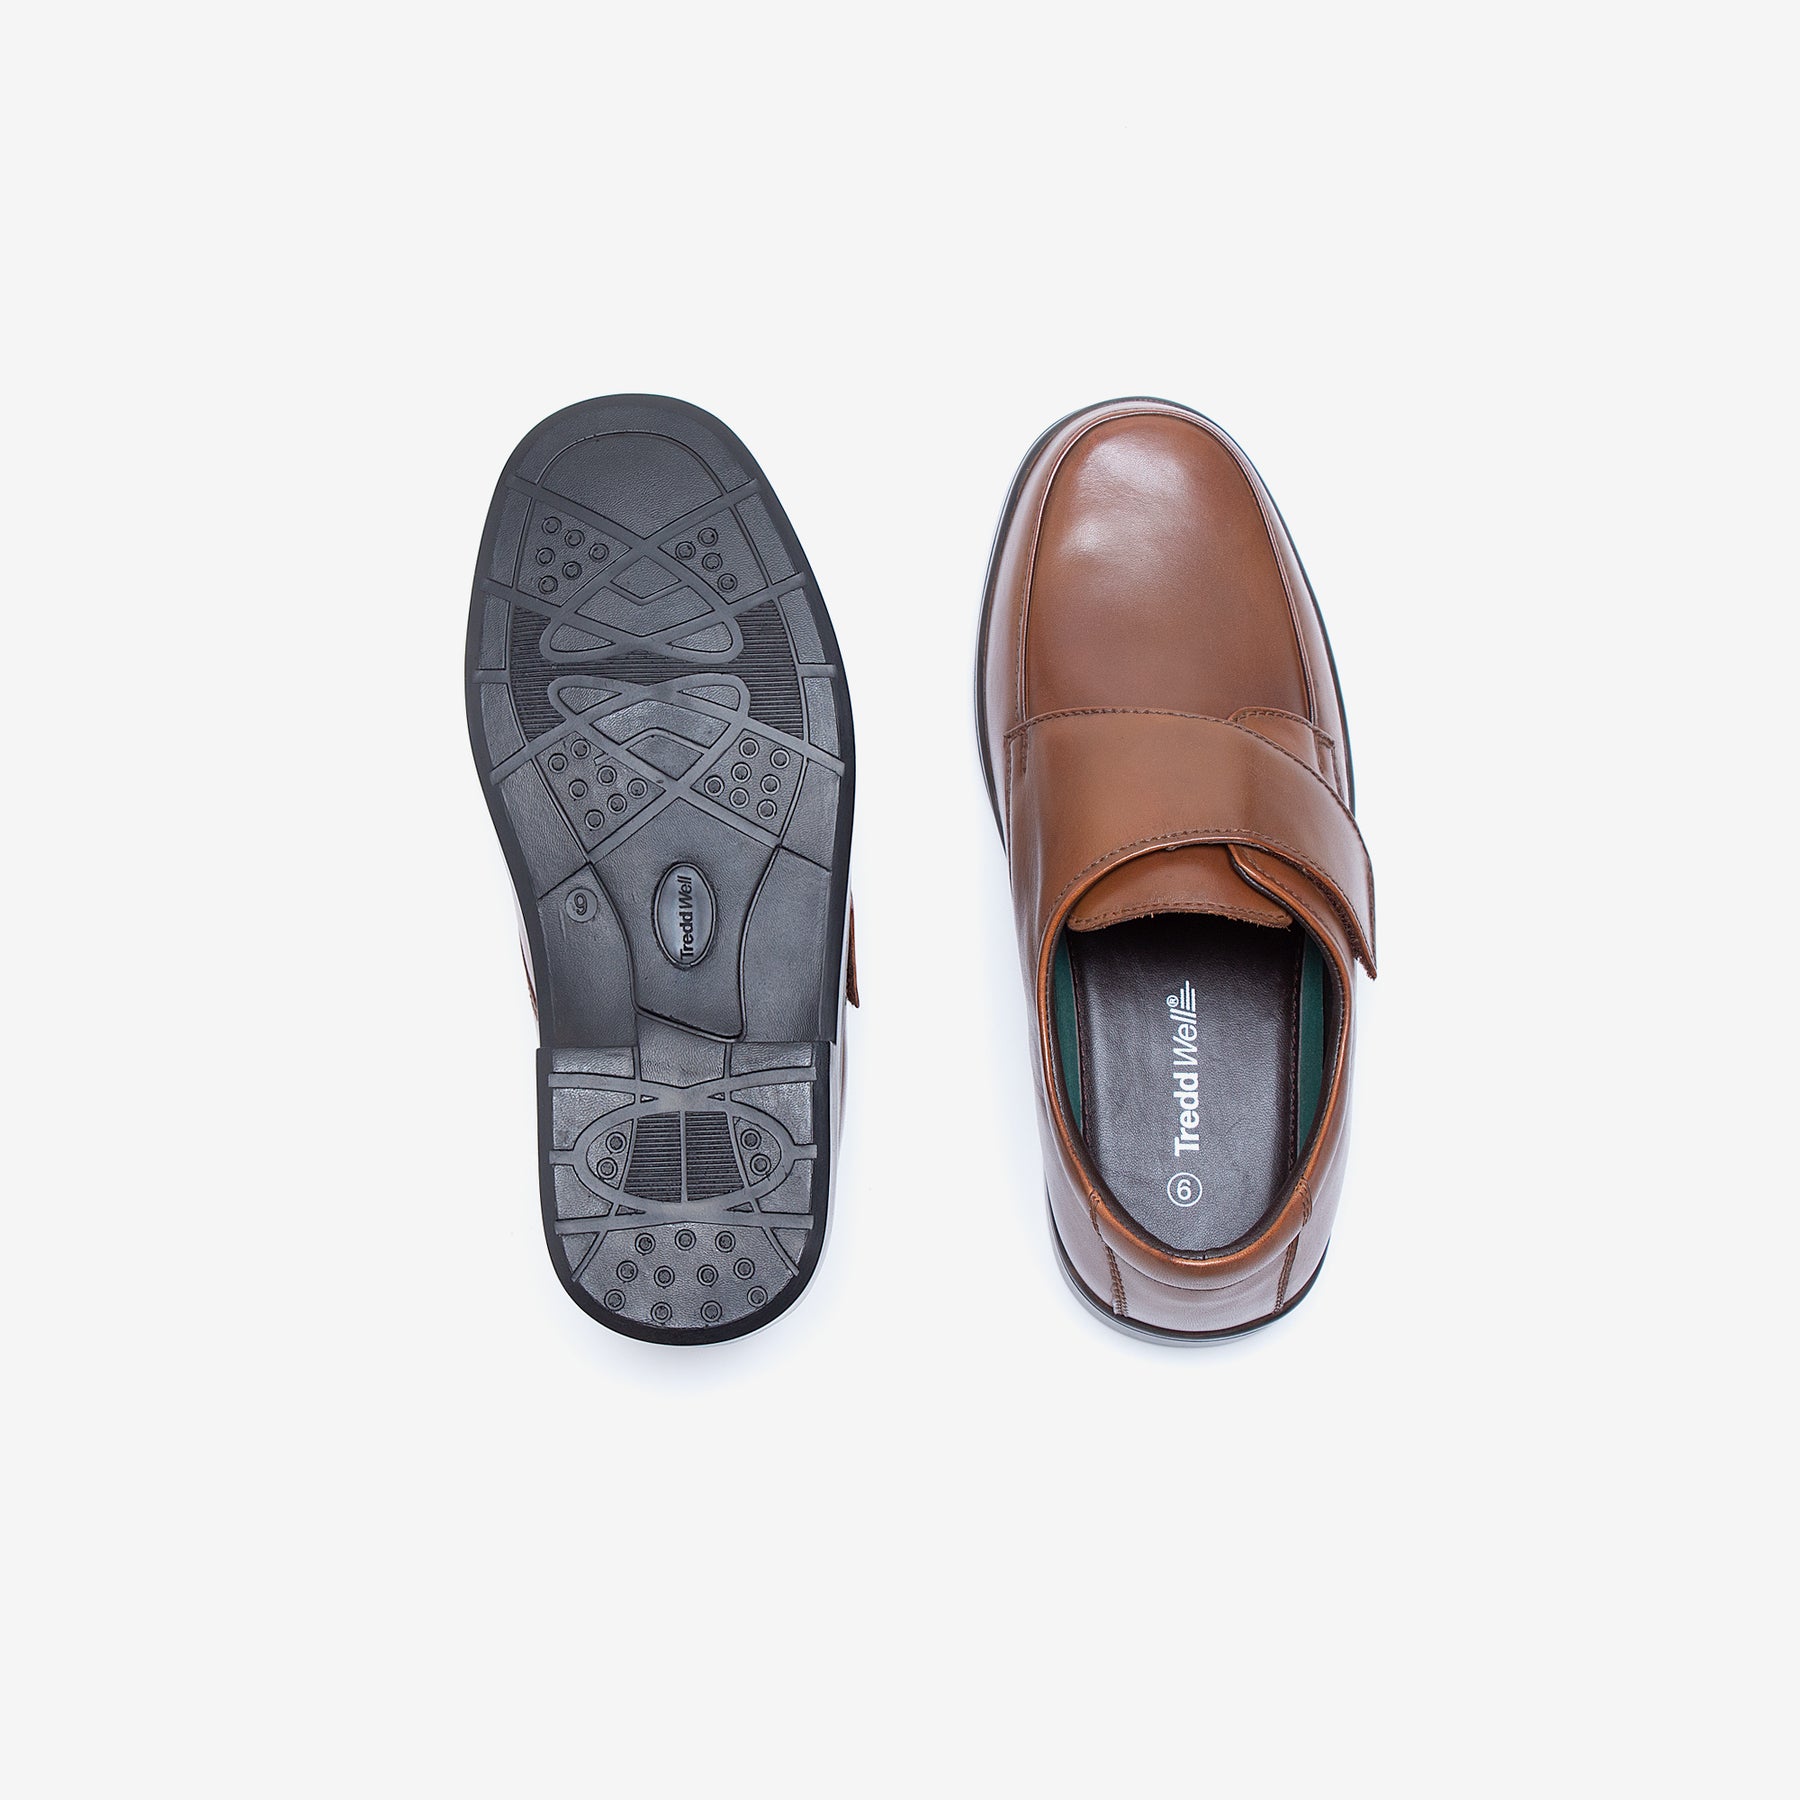 Mens Wide Fit Tredd Well York Shoes | Tredd Well | Wide Fit Shoes